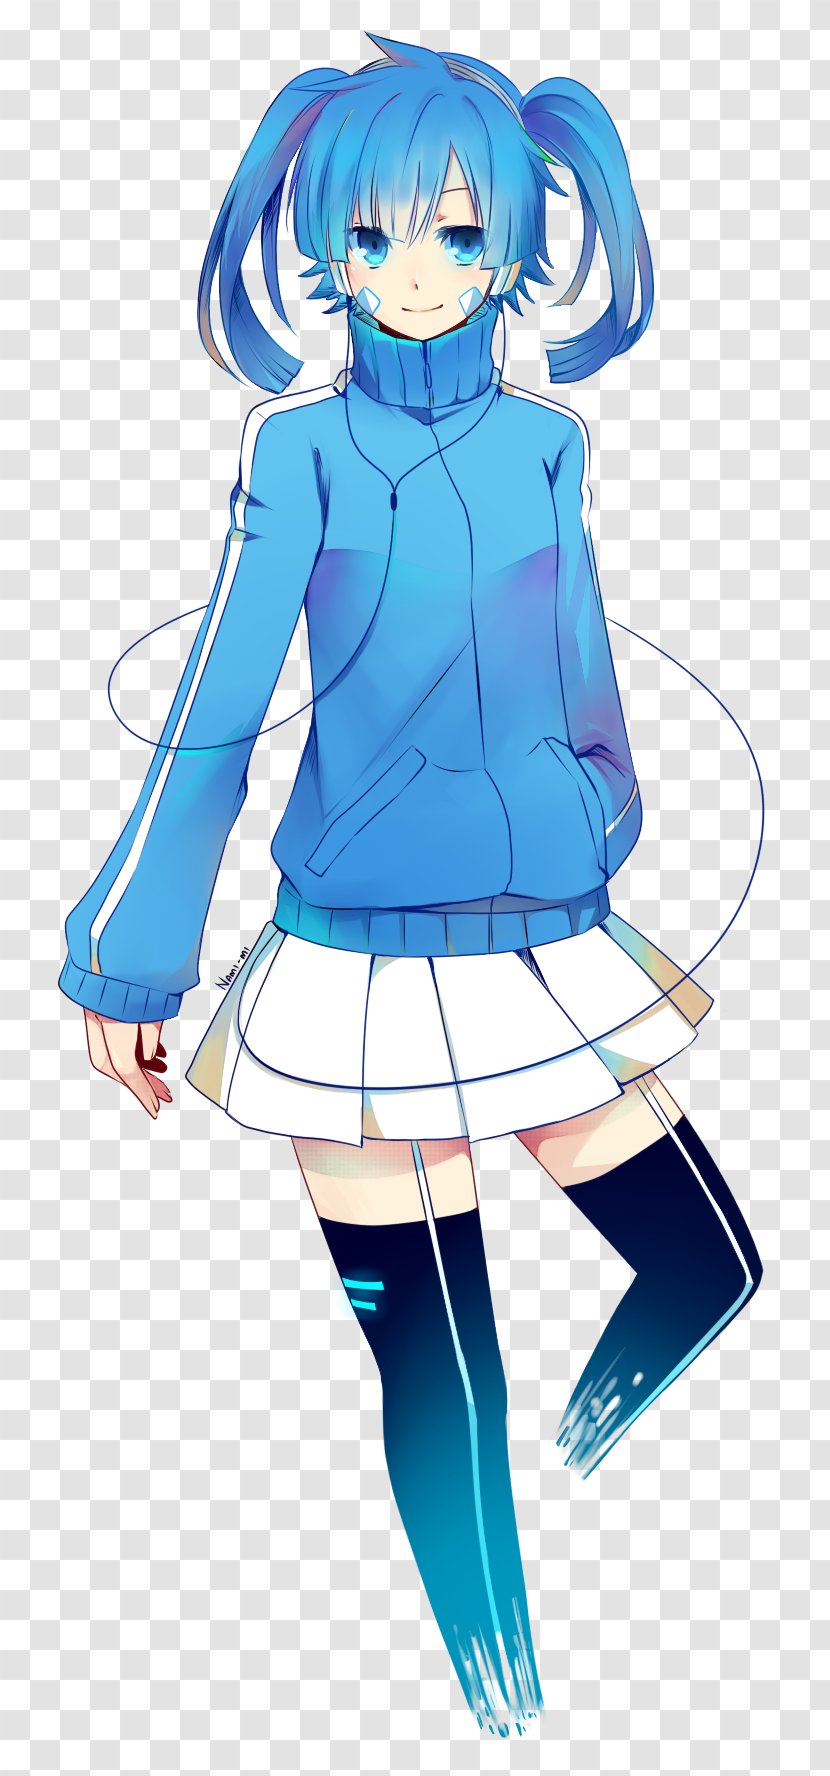 Kagerou Project Yumemi Hoshino Planetarian: The Reverie Of A Little Planet - Cartoon - Actor Transparent PNG